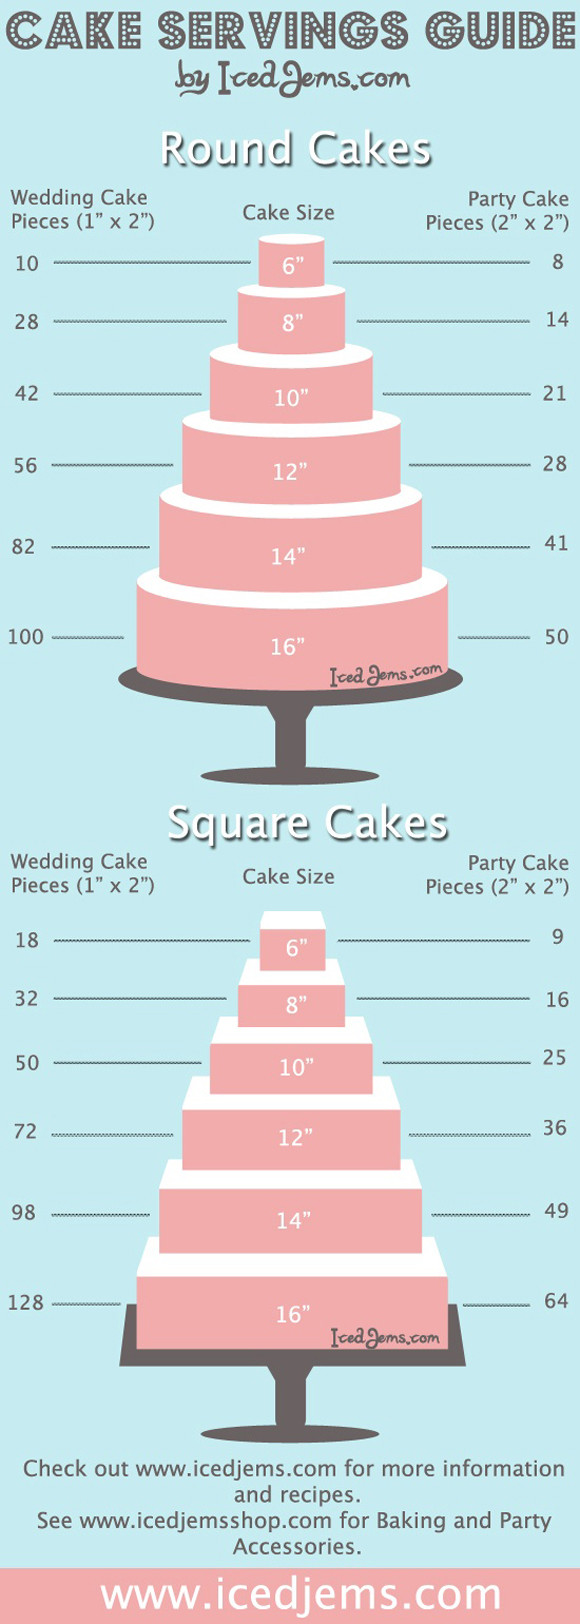 Wedding Cakes Servings the 20 Best Ideas for Wedding Cake Myths Exposed